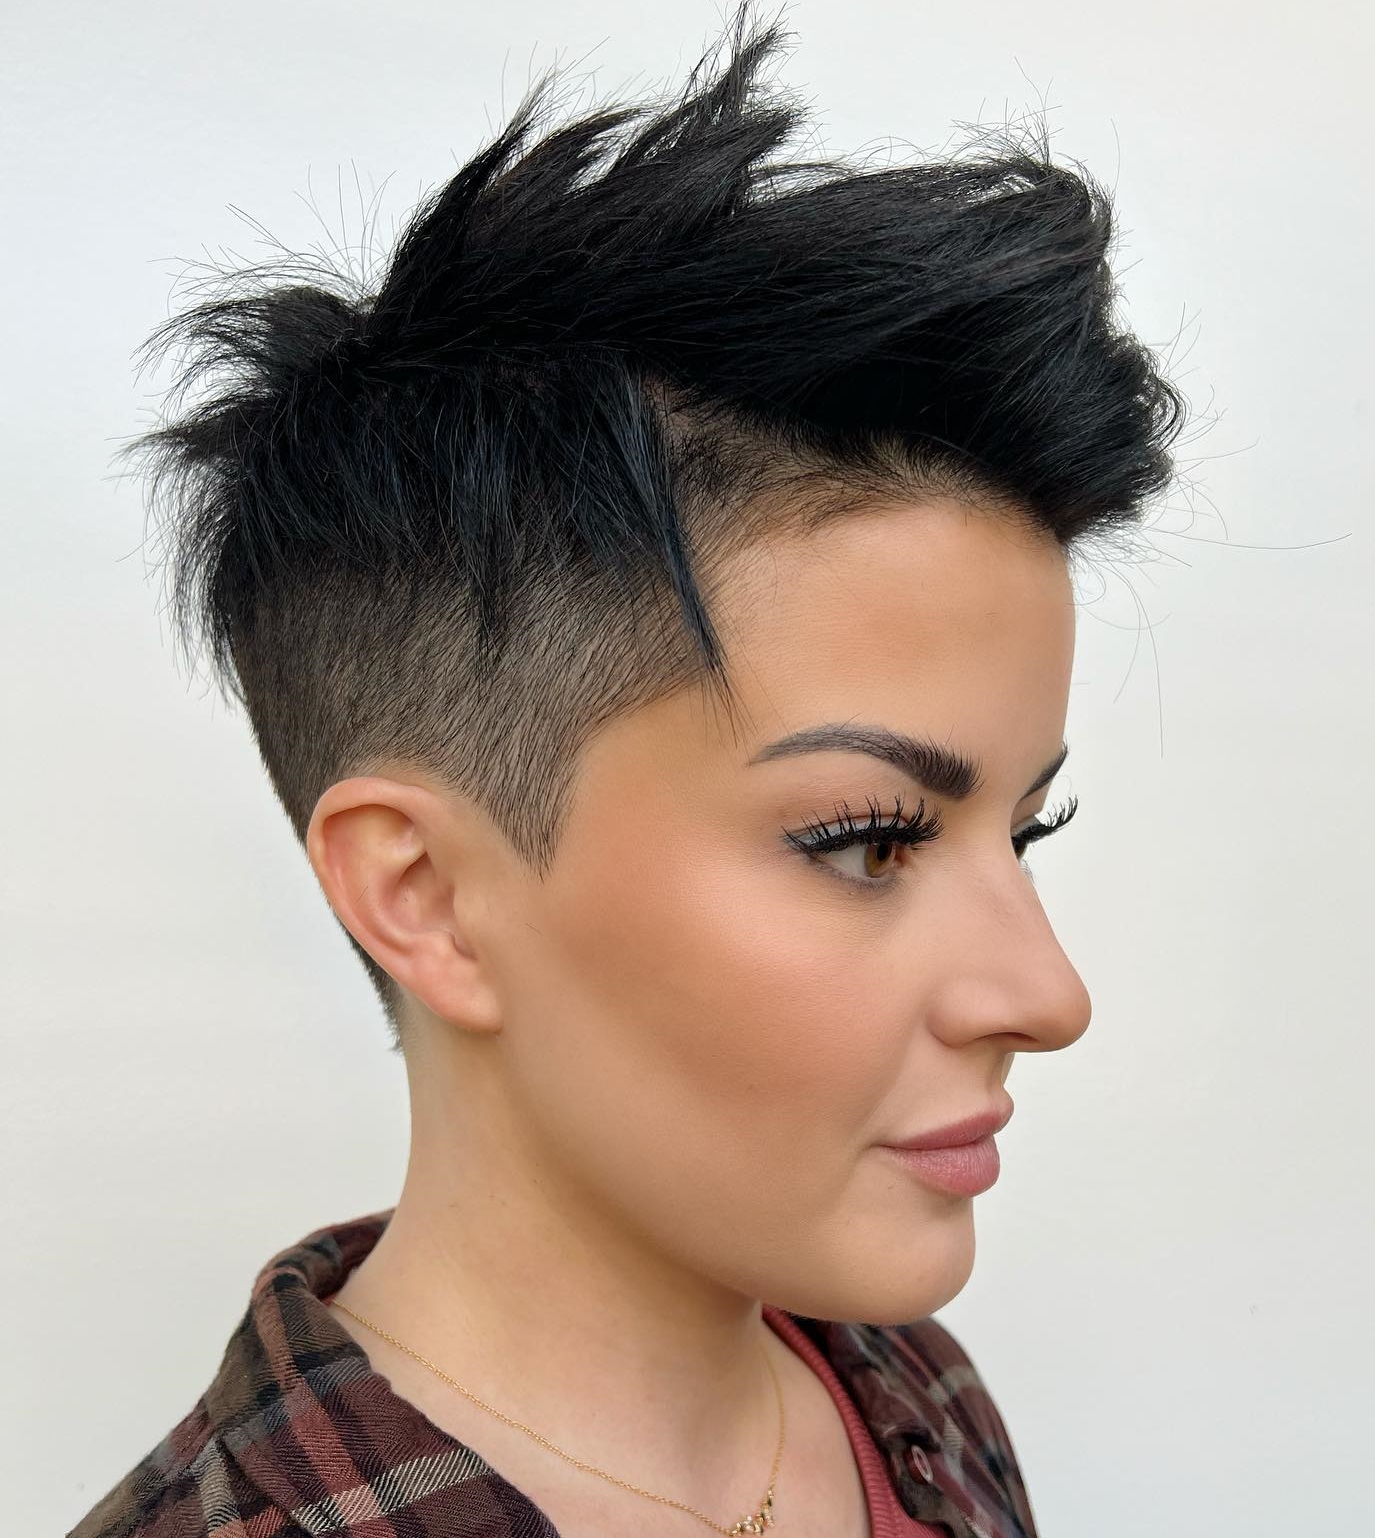 Black Short Pixie Cut with Shaved Sides